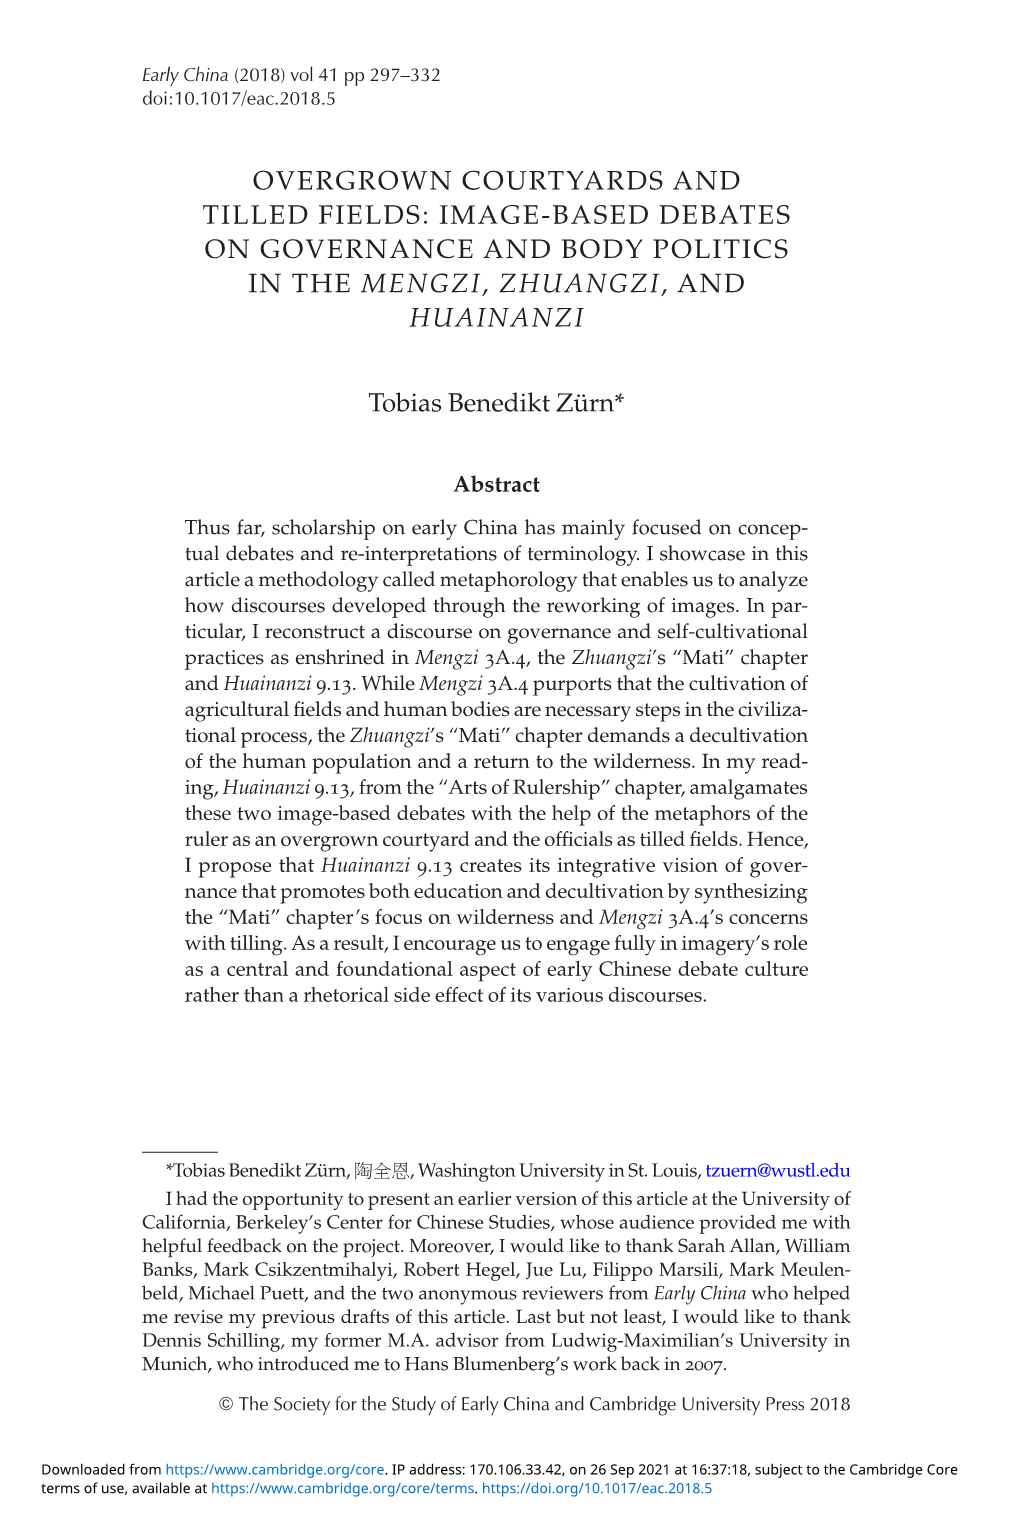 Overgrown Courtyards and Tilled Fields: Image-Based Debates on Governance and Body Politics in the Mengzi, Zhuangzi, and Huainanzi